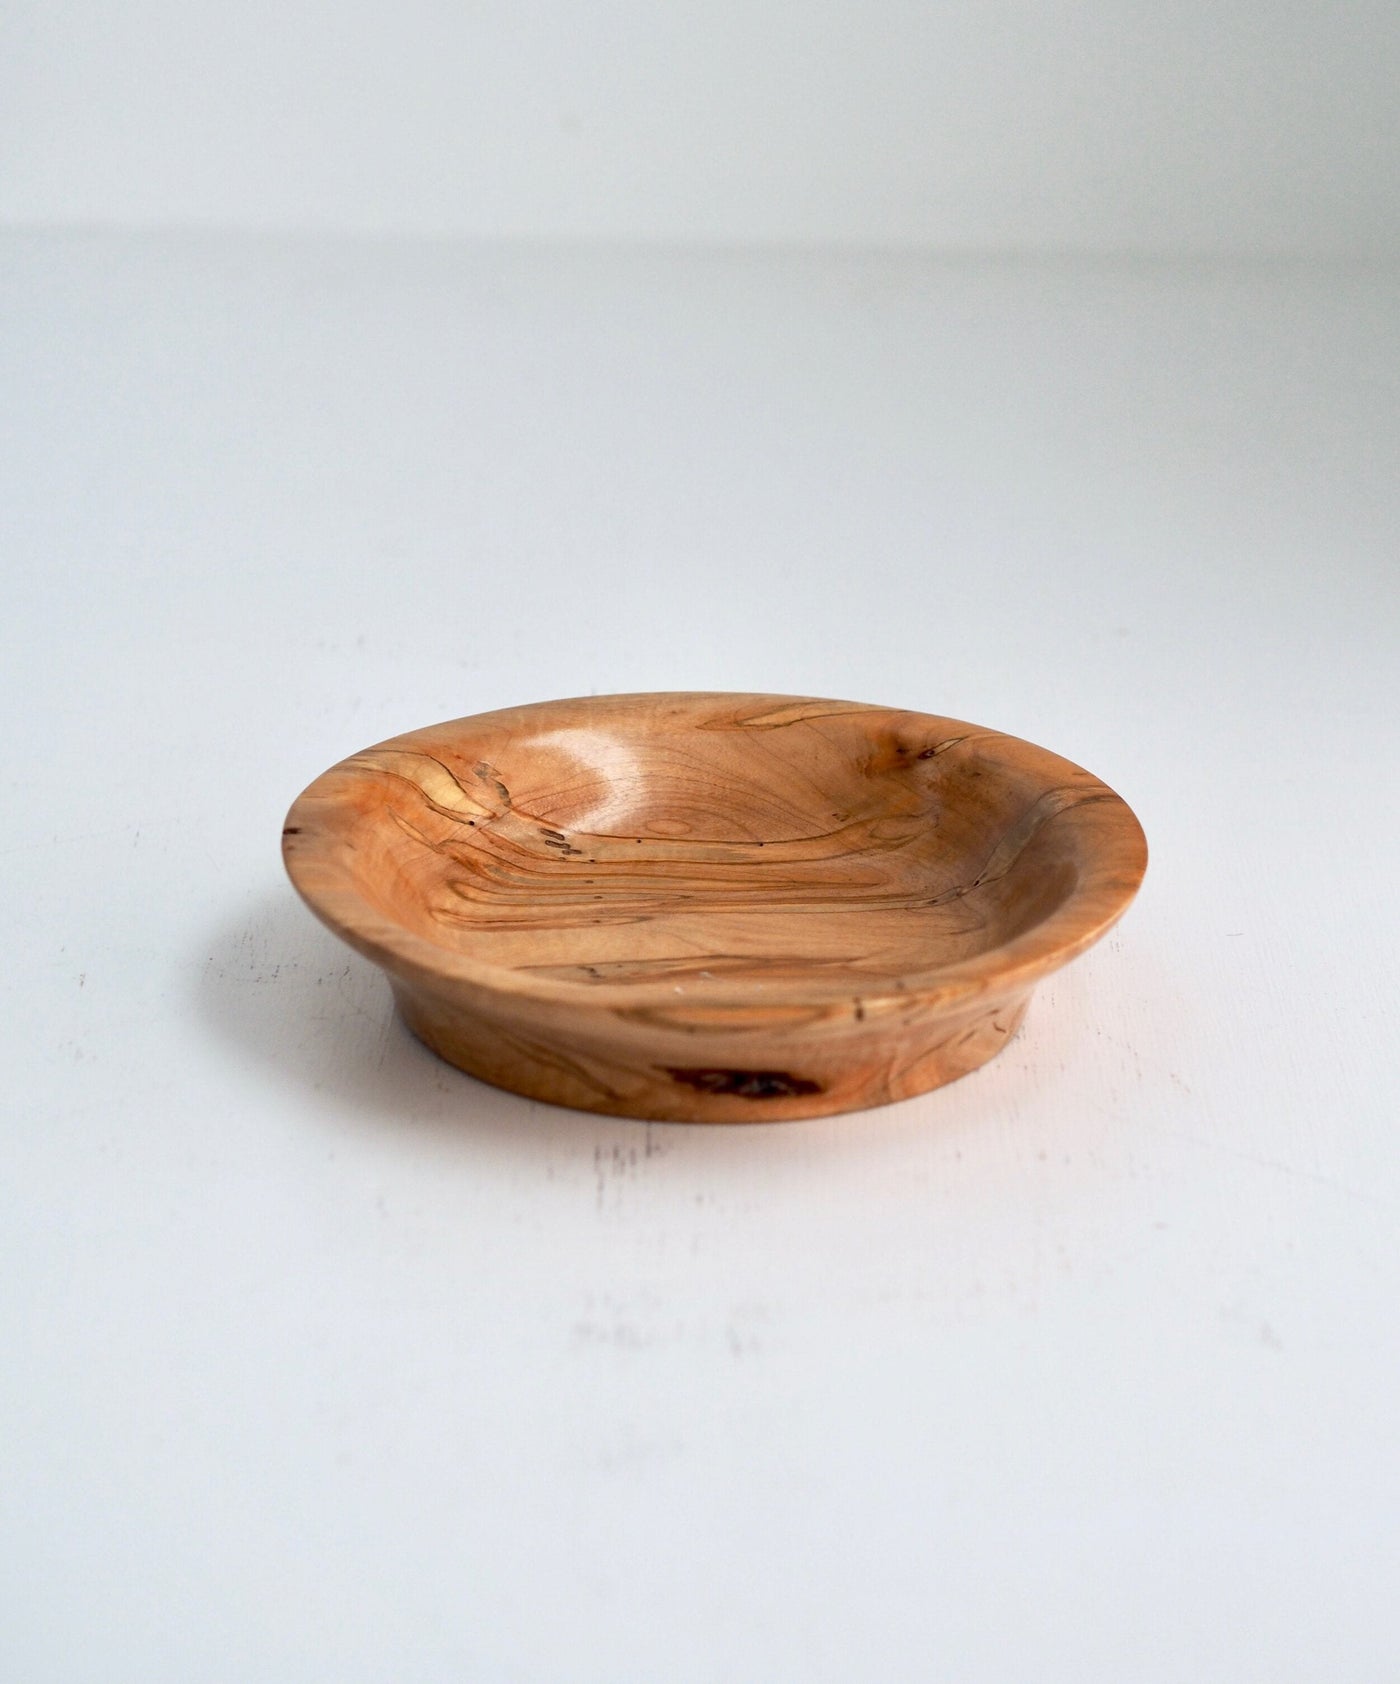 Spalted Maple Dish